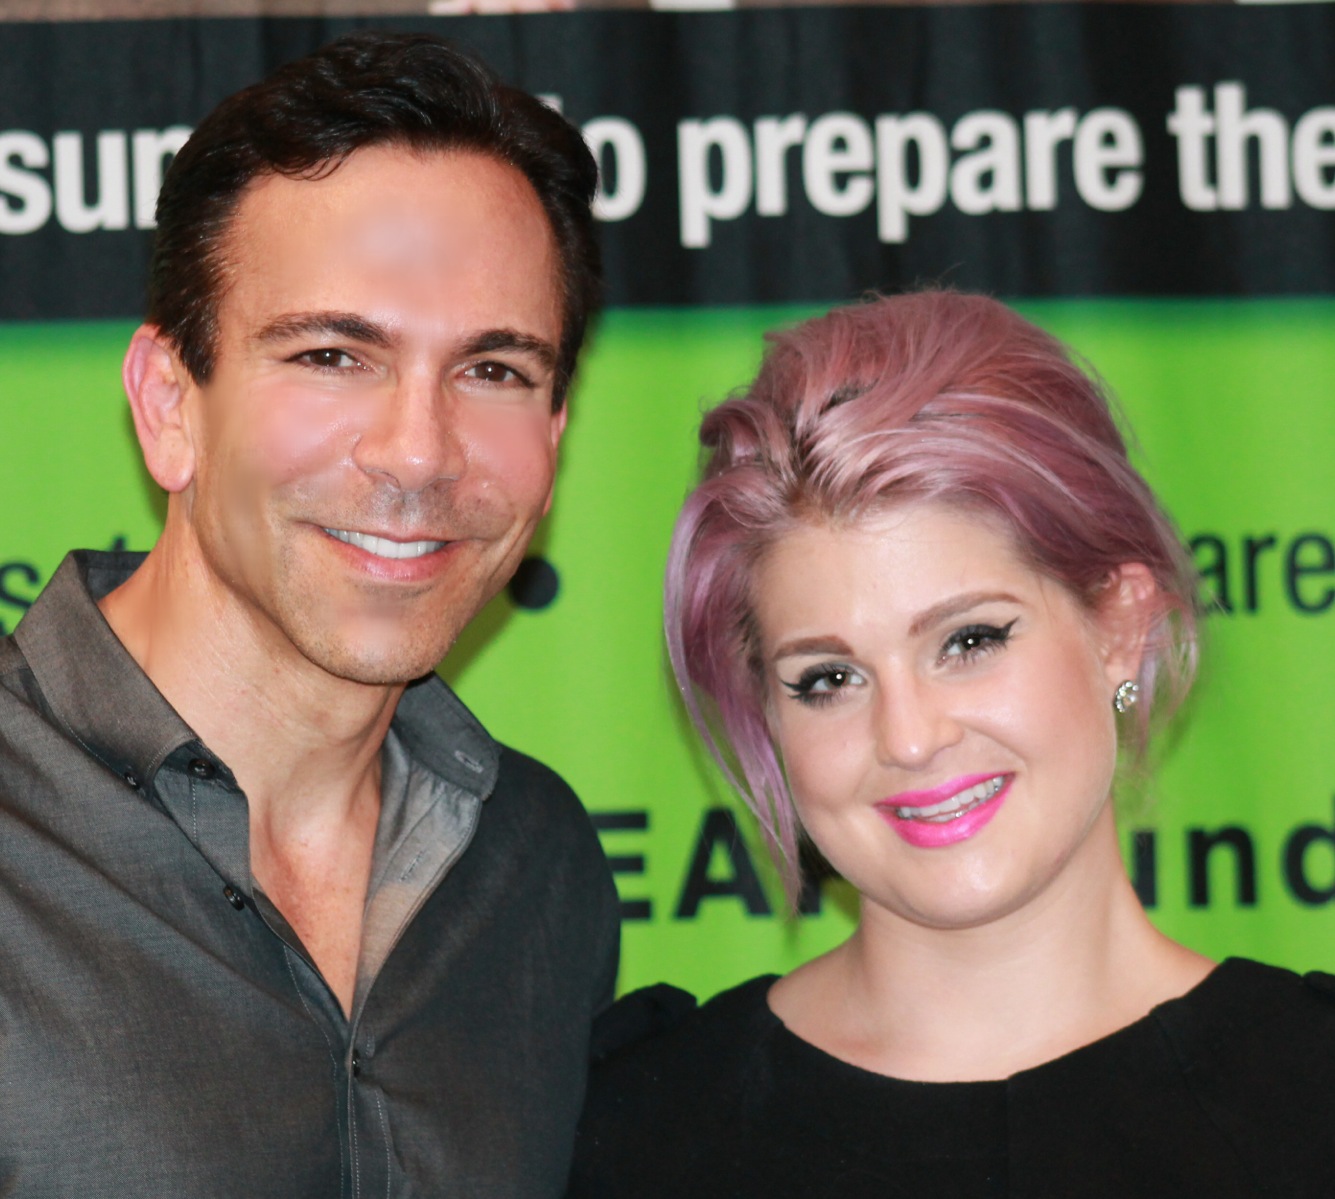 Dr. Bill Dorfman & Kelly Osbourne at his non-profit LEAP Foundation, where she was a surprise celebrity guest speaker